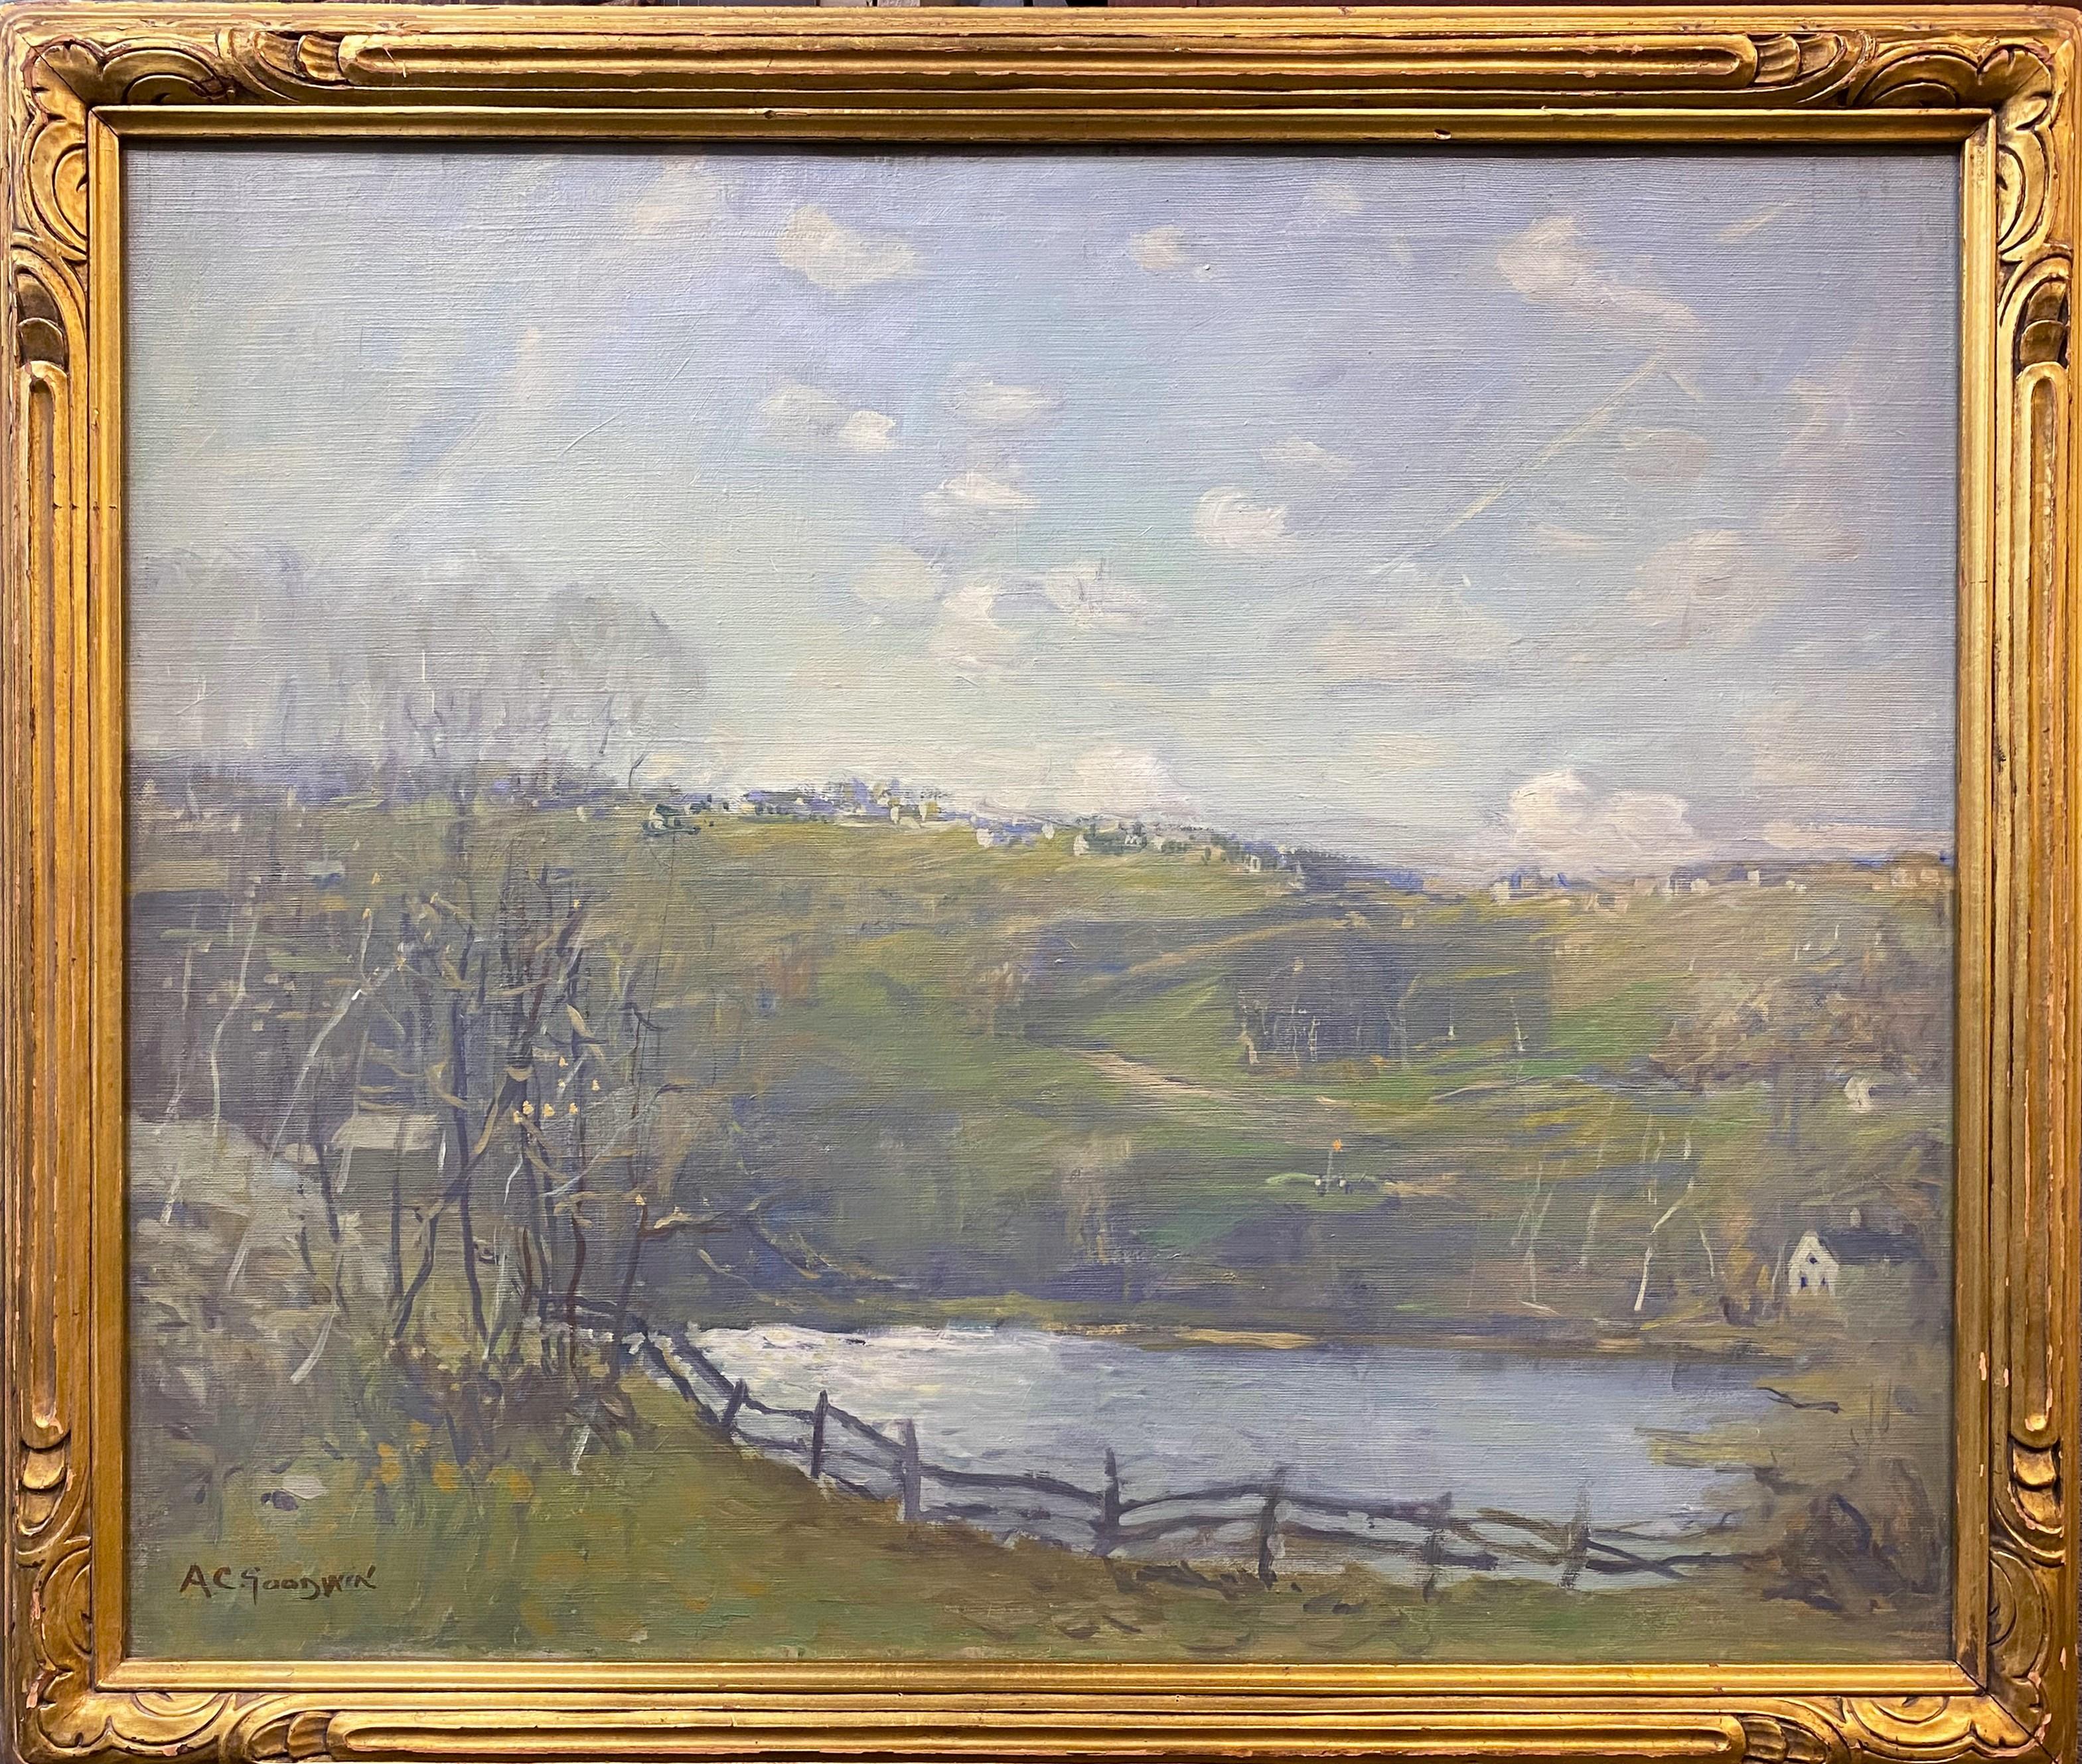 Golf Course, Probably The Country Club, Brookline MA - Art by Arthur Clifton Goodwin